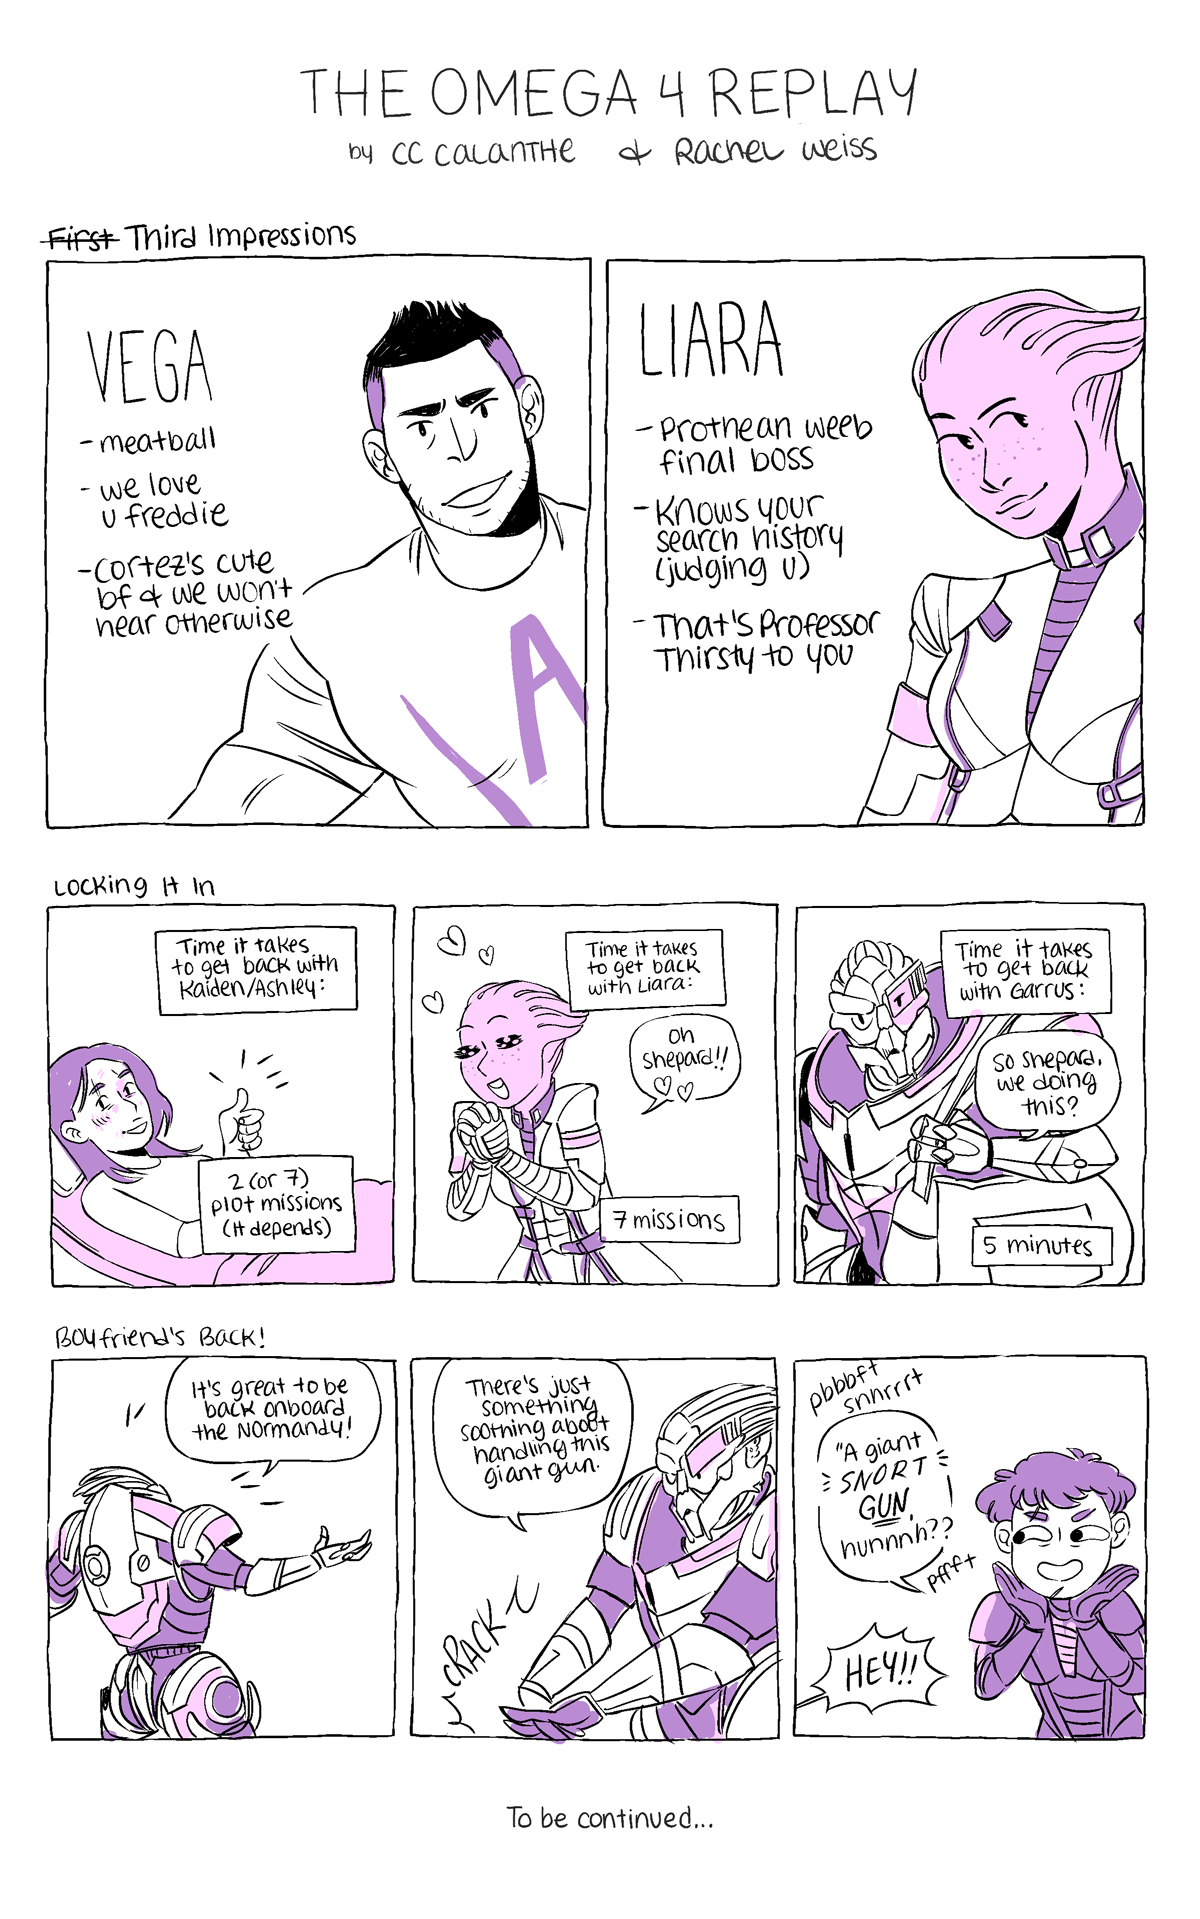 THE OMEGA 4 REPLAY
by CC Calanthe and Rachel Weiss

First (struck out) Third Impressions
Vega: meatball, we love u freddie, Cortez's cute bf & we won't hear otherwise
Liara: Prothean weeb final boss, knows your search history (judging u), that's Professor Thirsty to you

Comic 1: Locking It In
Panel 1: Ashley in recuperation in a hospital bed, giving a thumbs up. "Time it takes to get back with Kaiden/Ashley: 2 (or 7) plot missions (it depends)
Panel 2: Liara, swooning and swaying "Oh Shepard!!" "Time it takes to get back with Liara: 7 missions"
Panel 3: Garrus holding a duffle bag and saying, "So Shepard, we doing this?" "Time it takes to get back with Garrus: 5 minutes"

Comic 2: Boyfriend's Back
Panel 1: Garrus stretches out, exuberant. "It's great to be back onboard the Normandy!"
Panel 2: Garrus, cracking his fingers. "There's just something soothing about handling this giant gun."
Panel 3: Shepard, snorting like a little gremlin. "A giant *SNORT* GUN, hunnnhh?" Garrus yells off panel, "HEY!!"